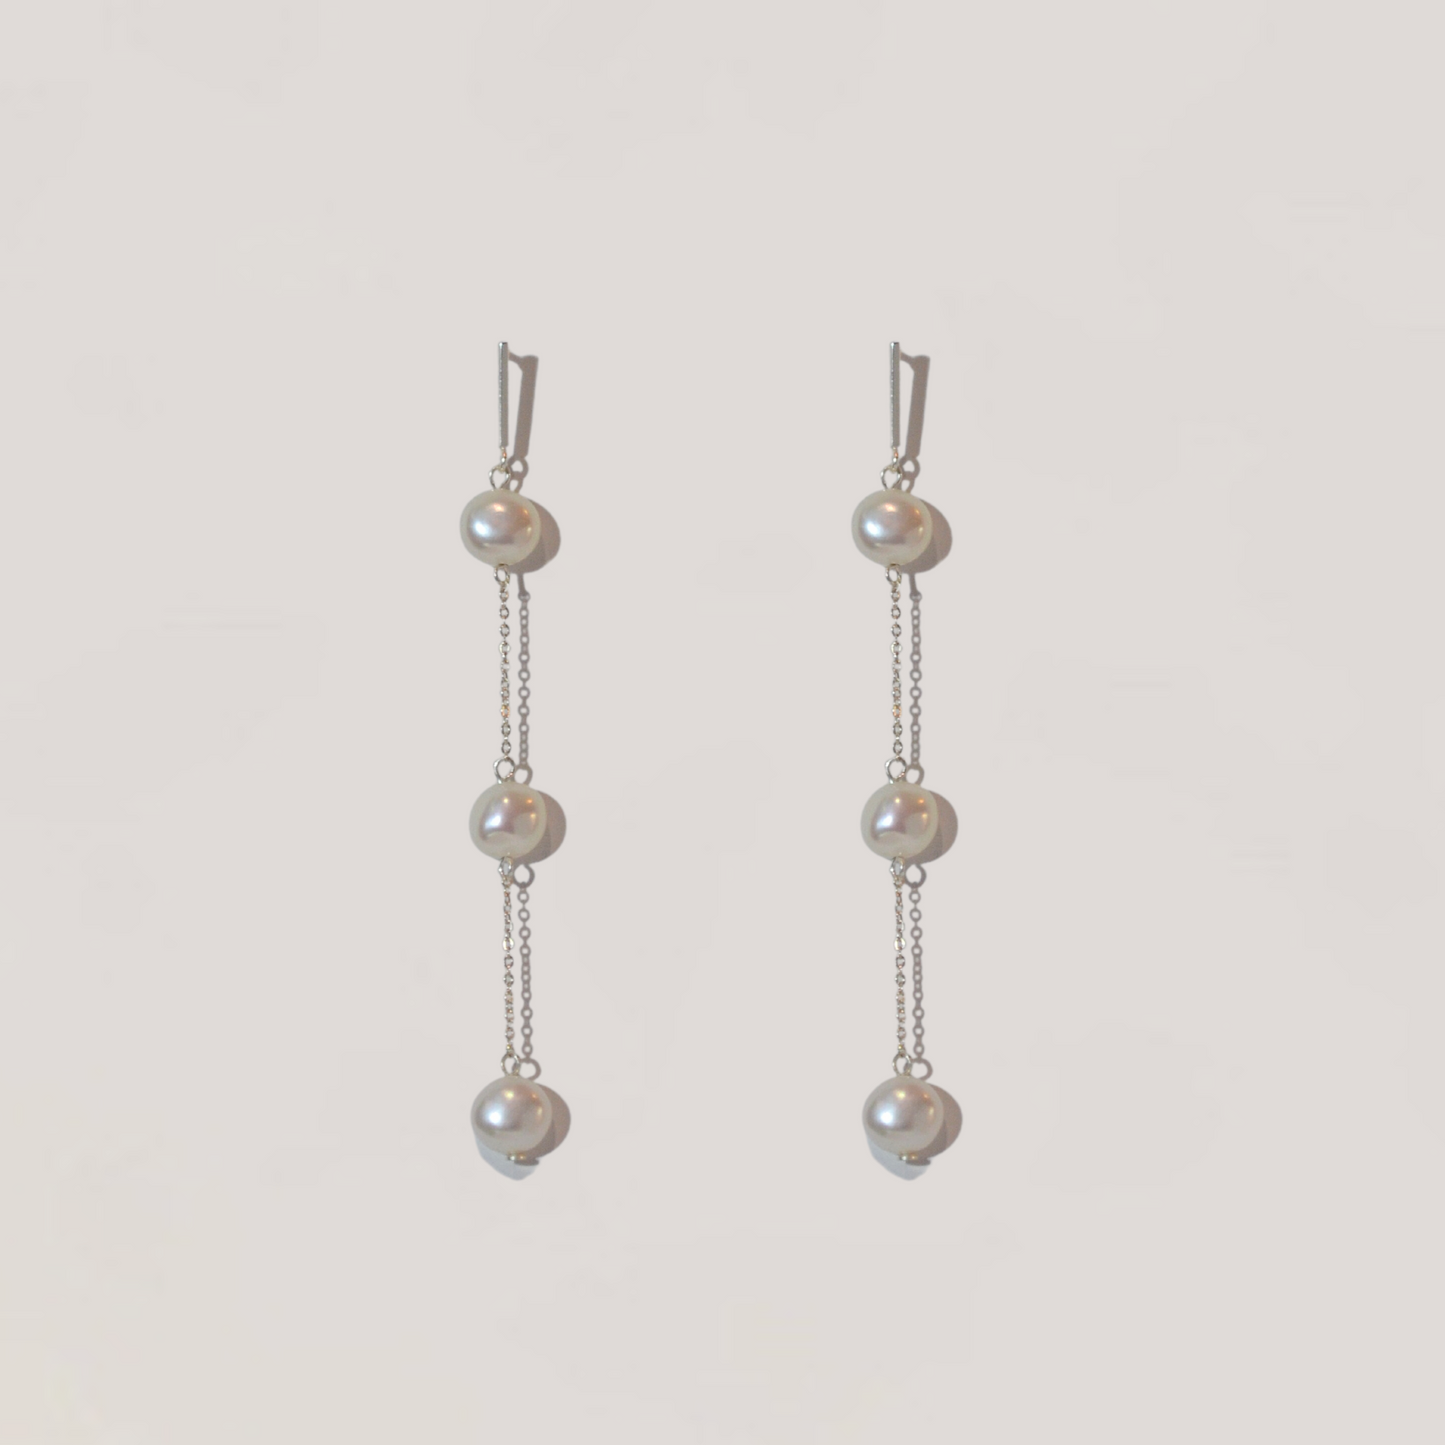 Olivia Collection, long silver chain with 3 pearl drop earrings, bar stud 